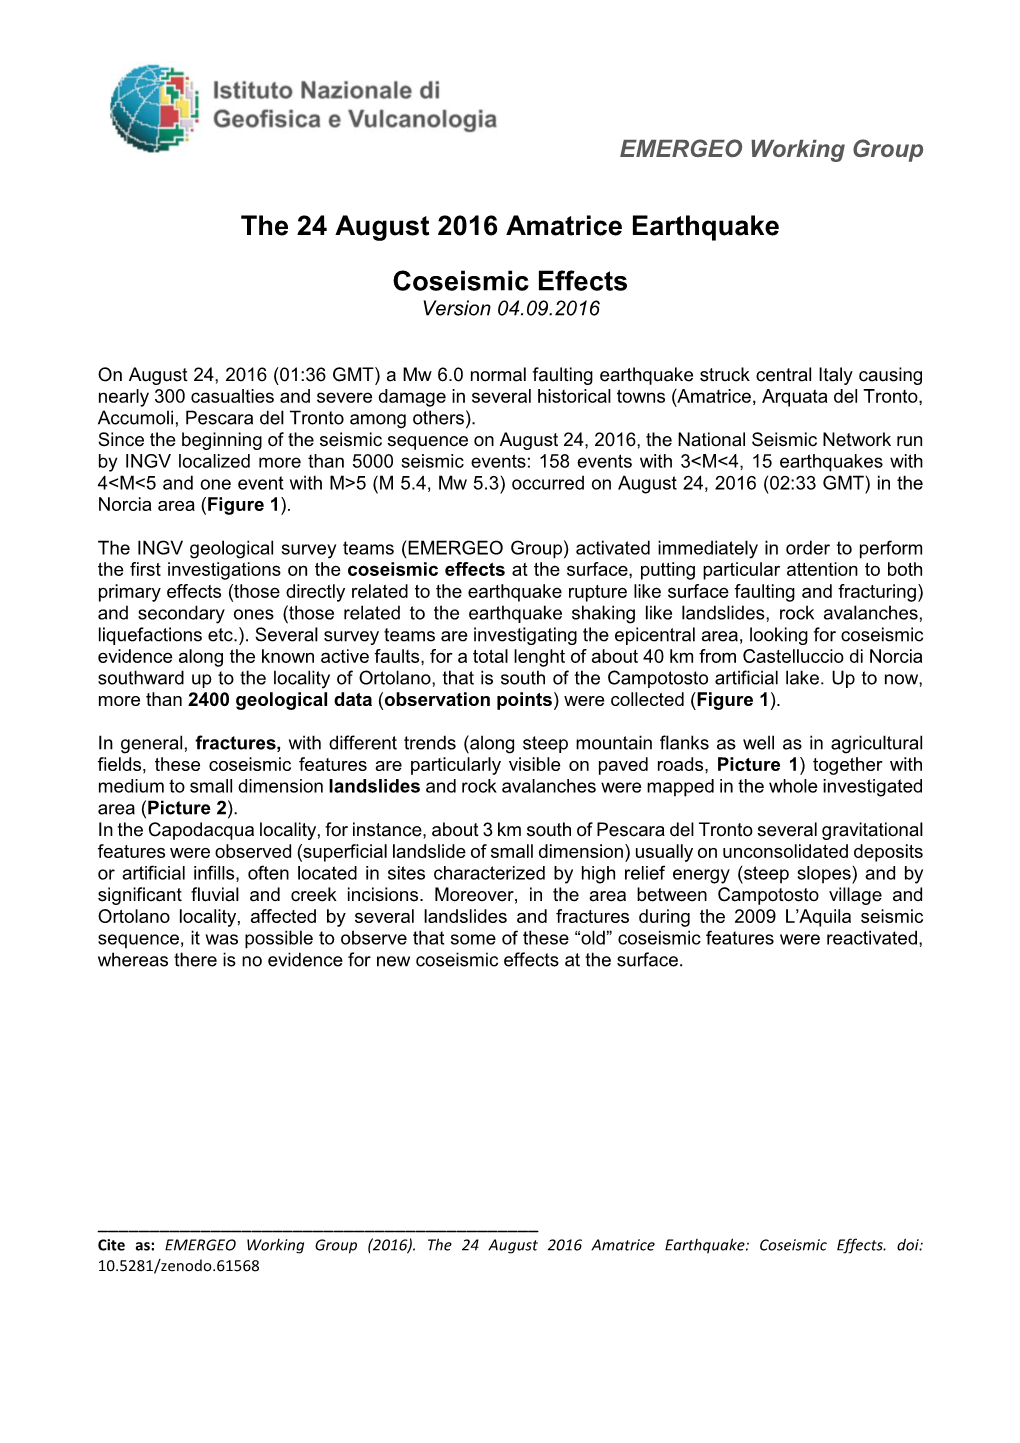 The 24 August 2016 Amatrice Earthquake Coseismic Effects